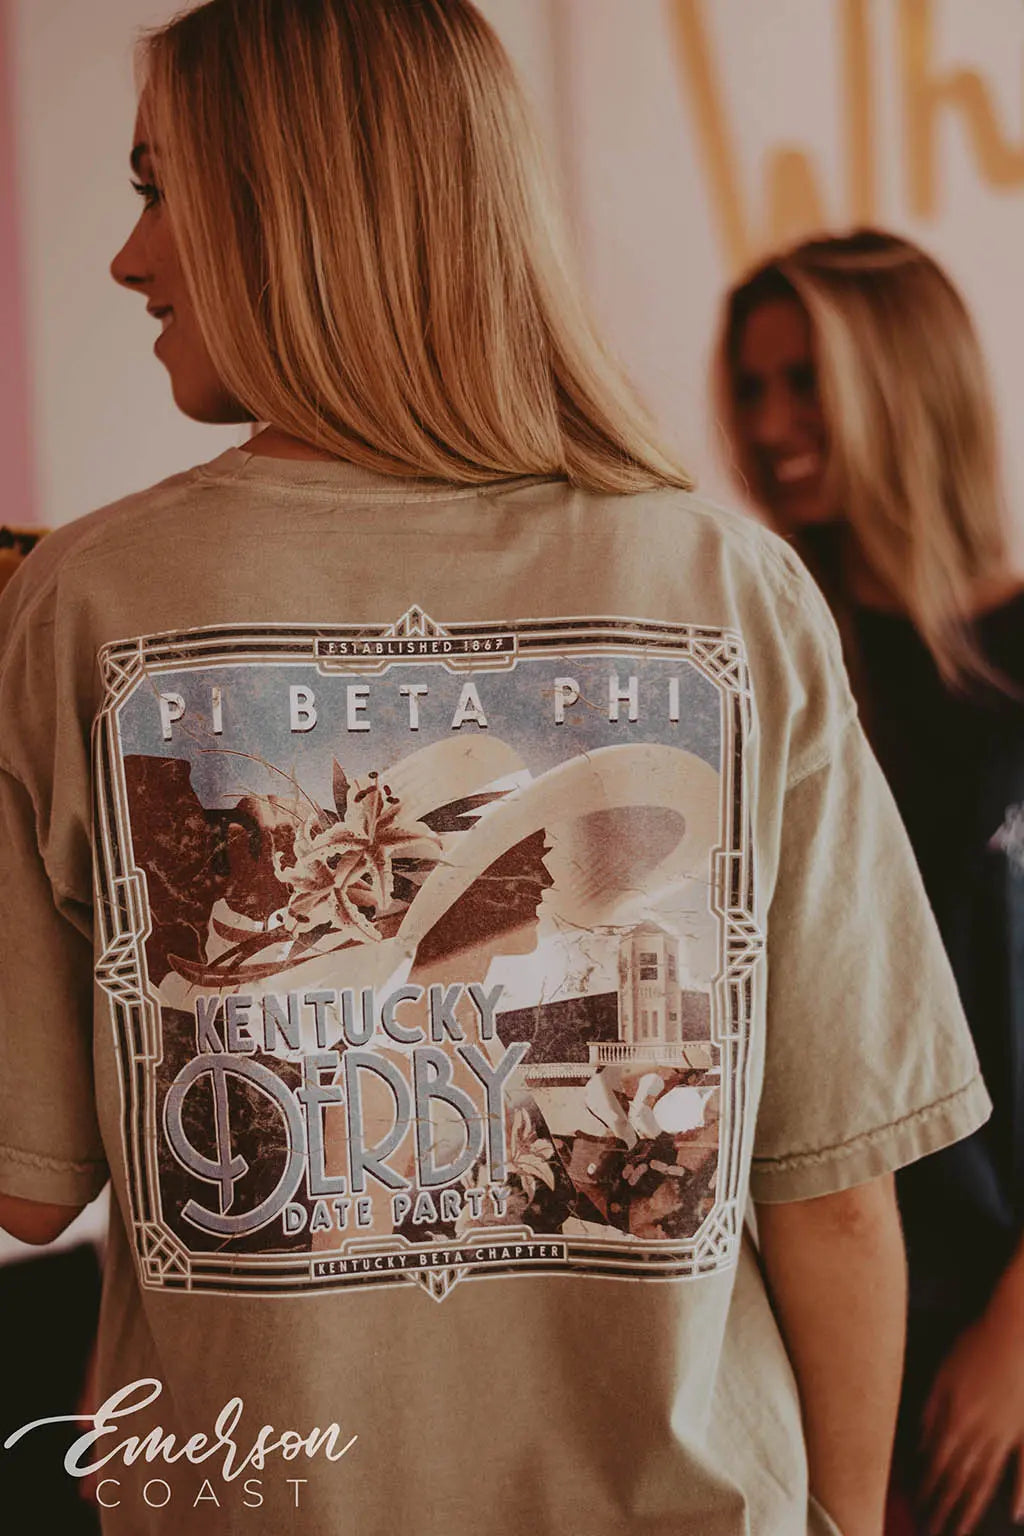 Pi Beta Phi Kentucky Derby Date Party Tee